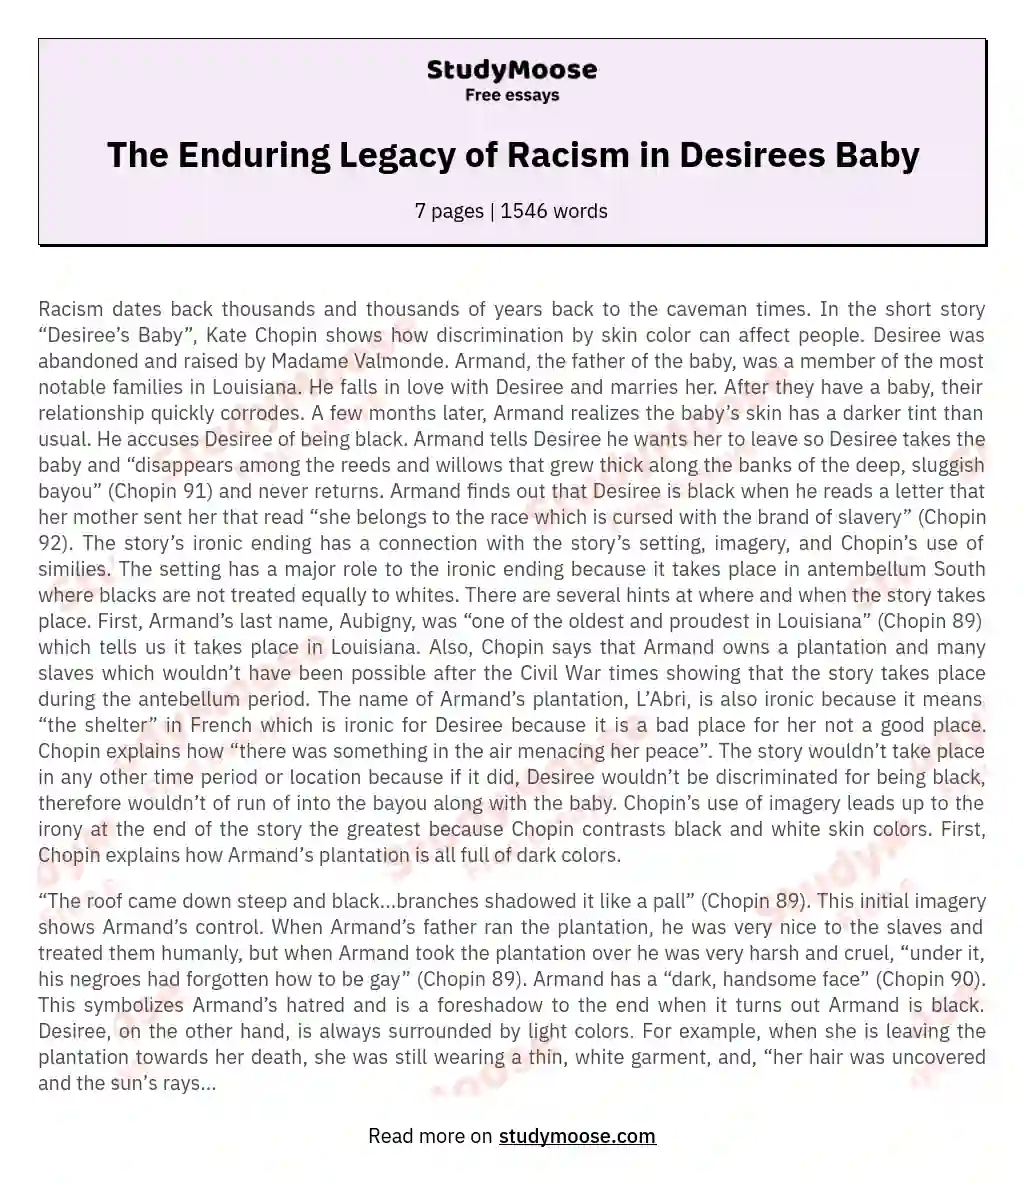 The Enduring Legacy of Racism in Desirees Baby essay